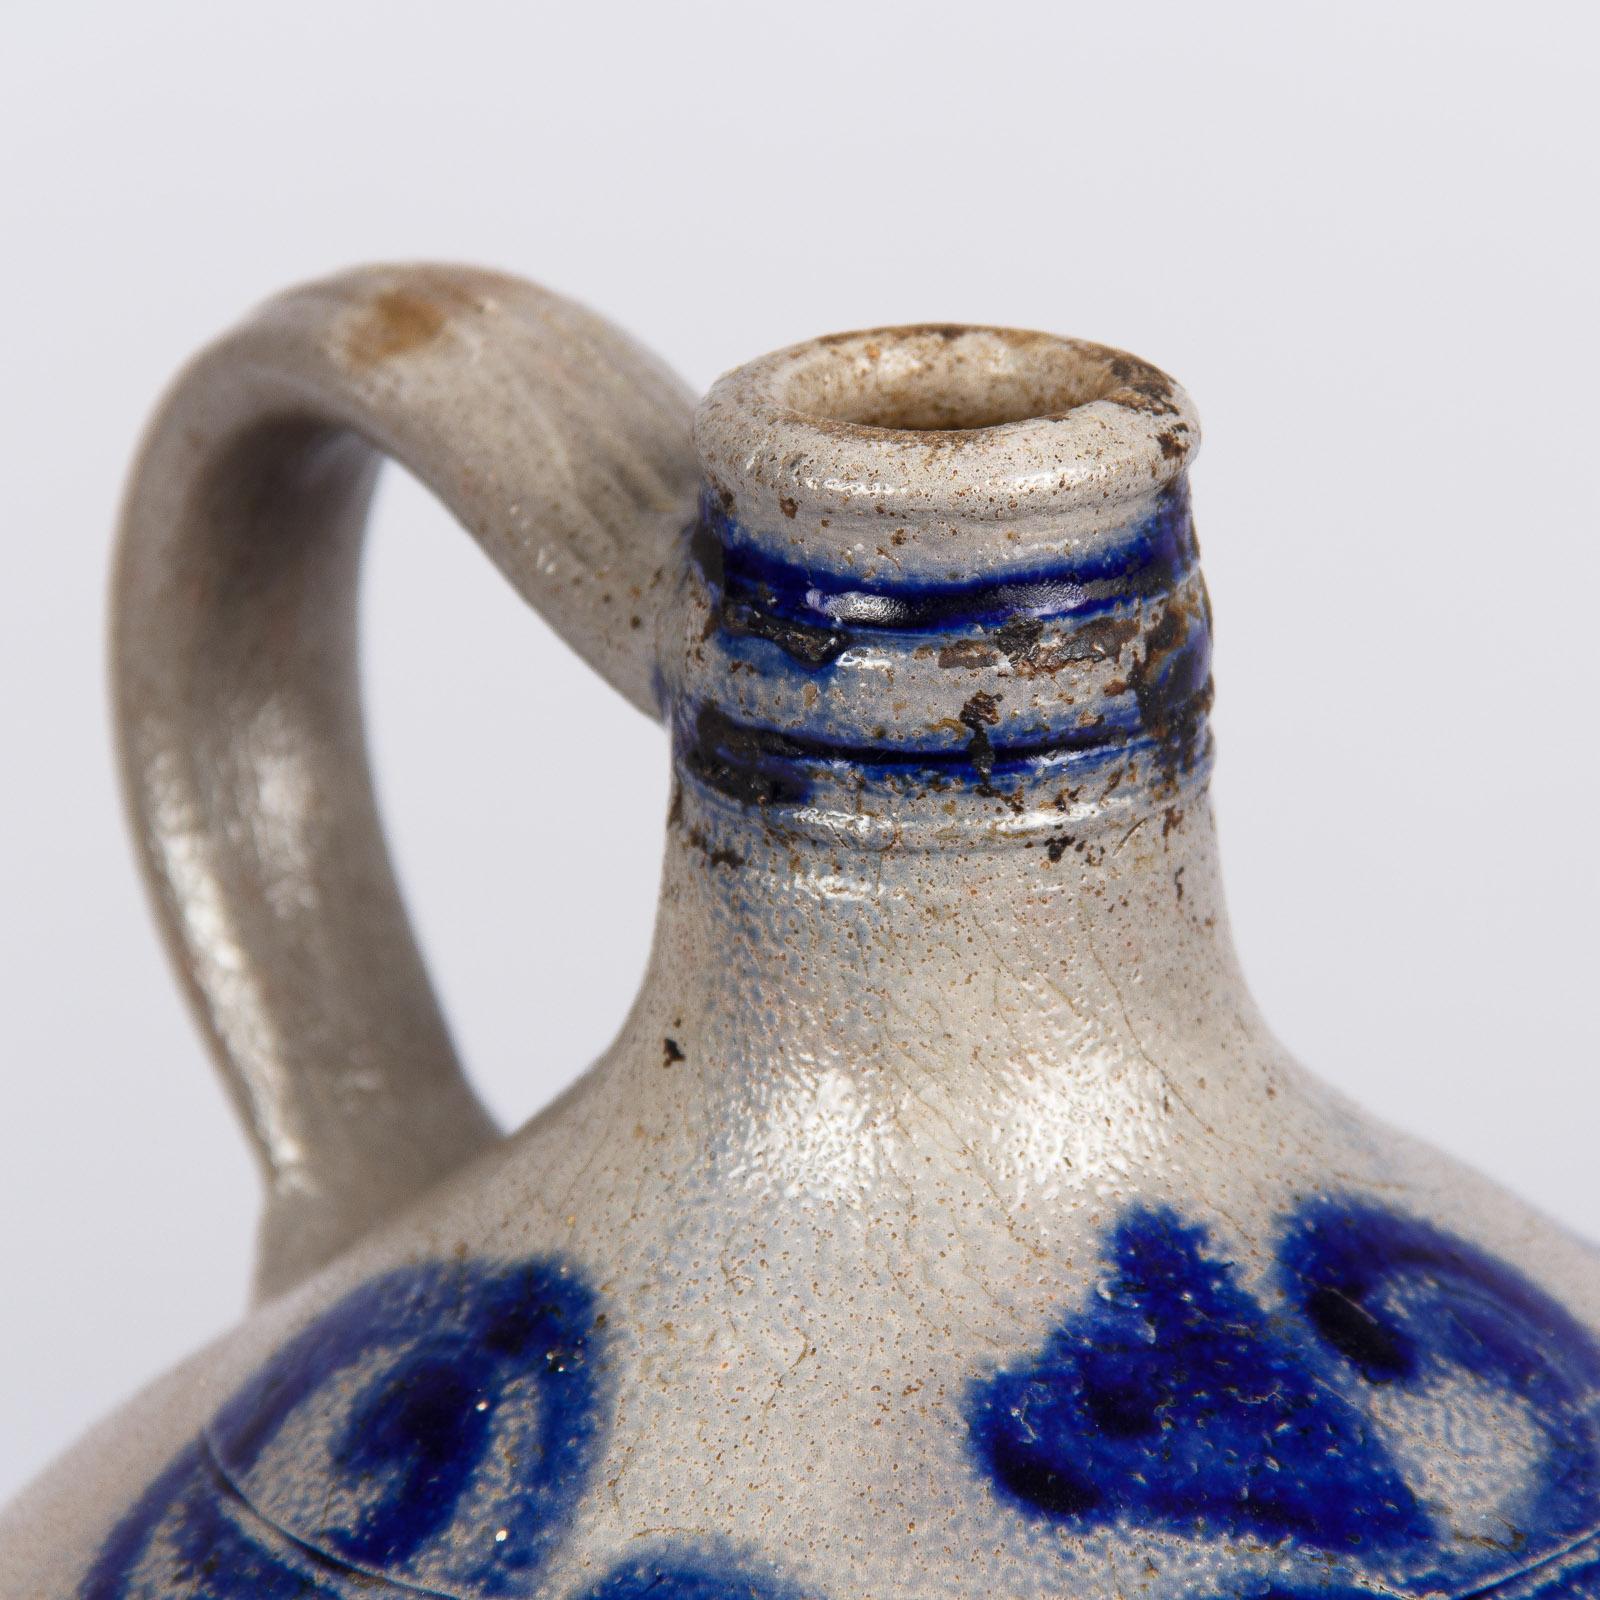 French Provincial Earthenware Pitcher from Alsace Region, France, 1920s